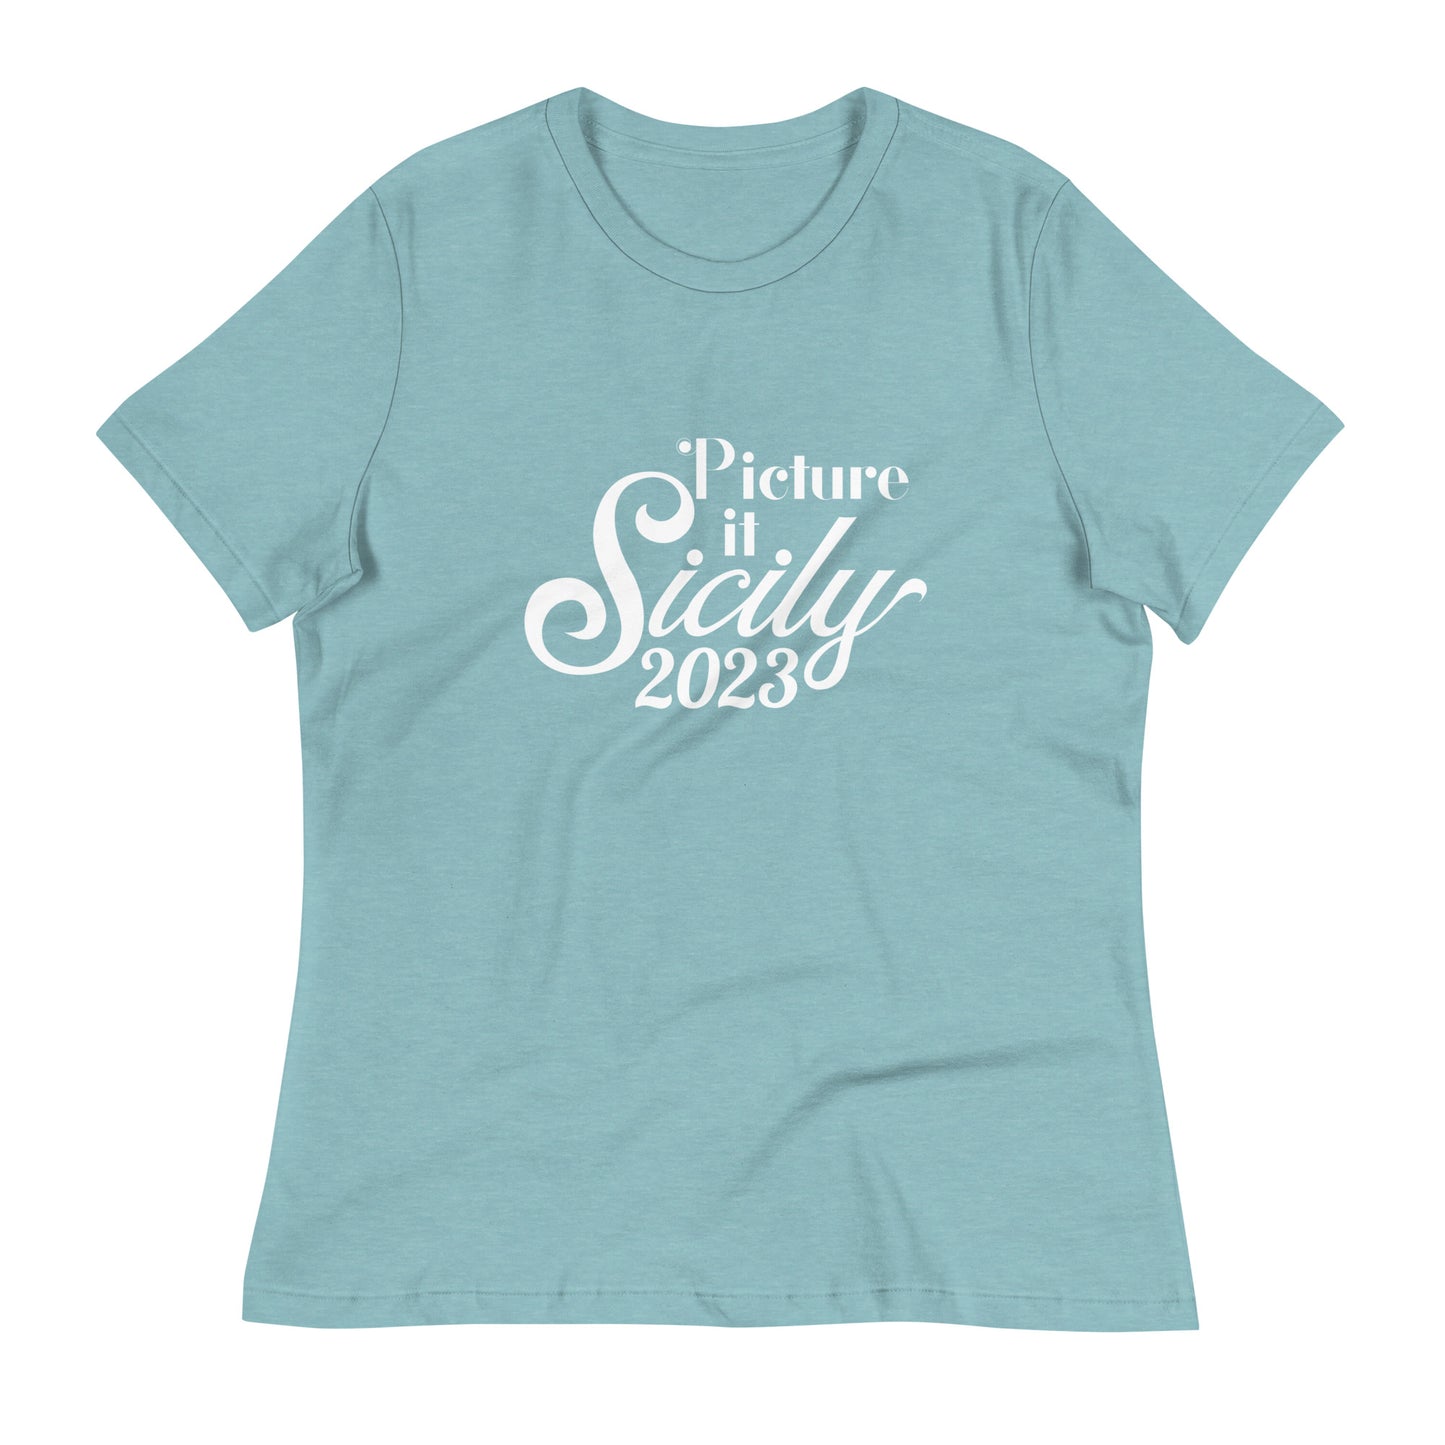 Picture It. Sicily, 2023 - Women's Relaxed Cruise T-Shirt